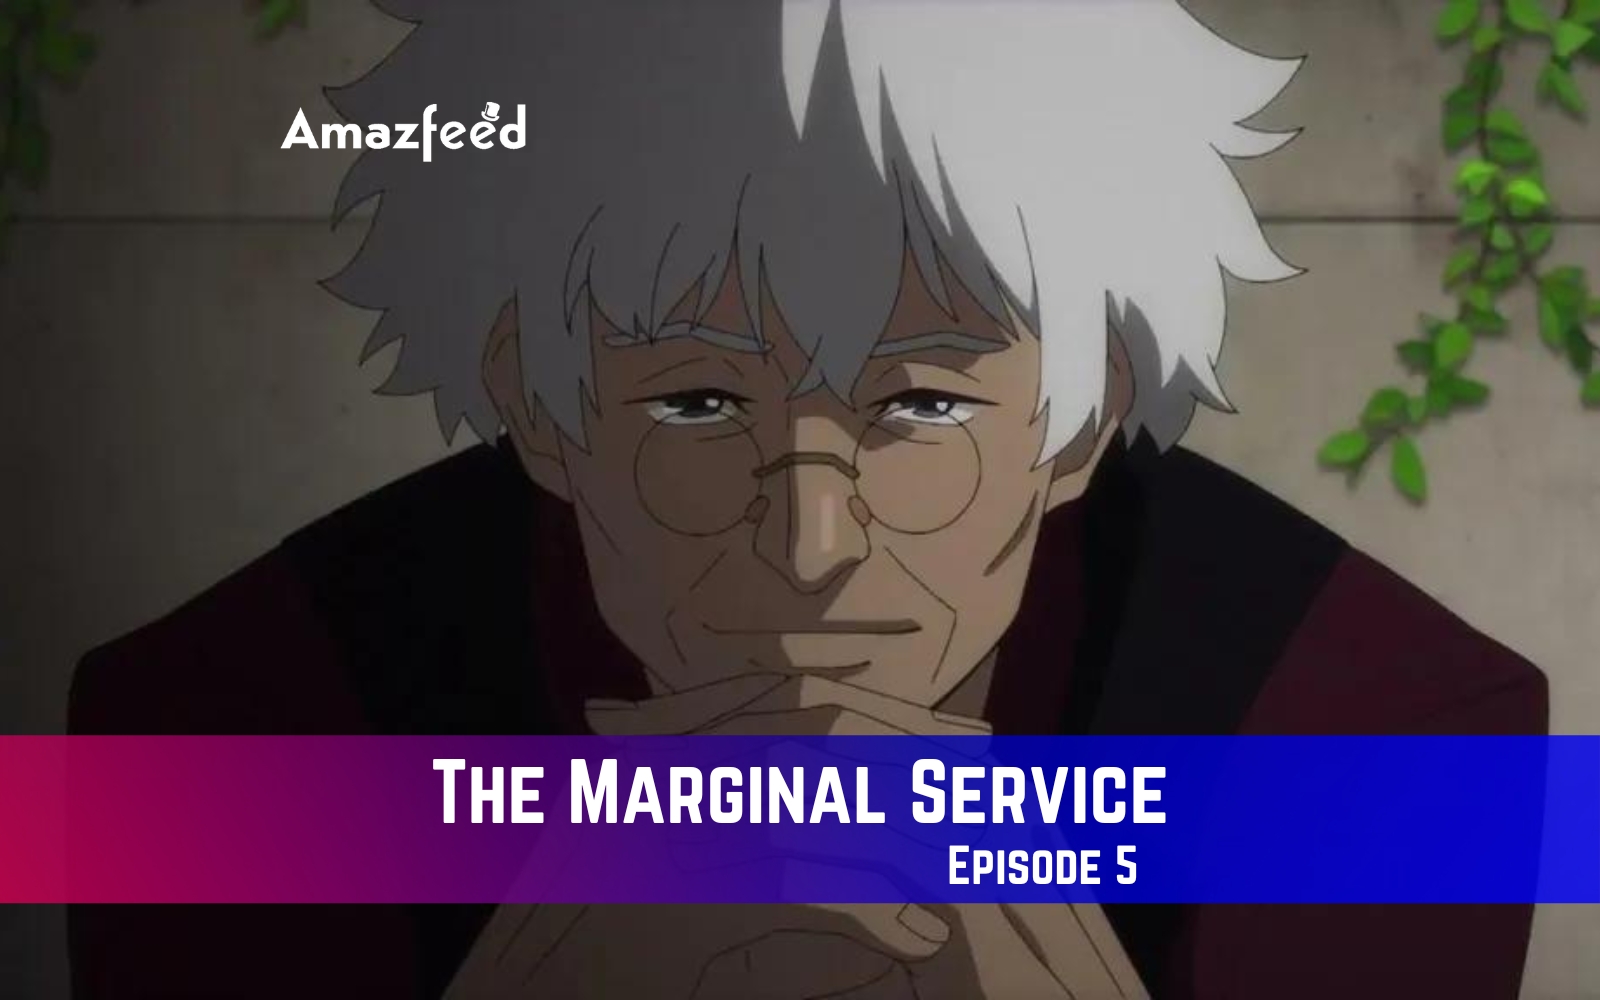 The Marginal Service episode 5: Release timing for all regions